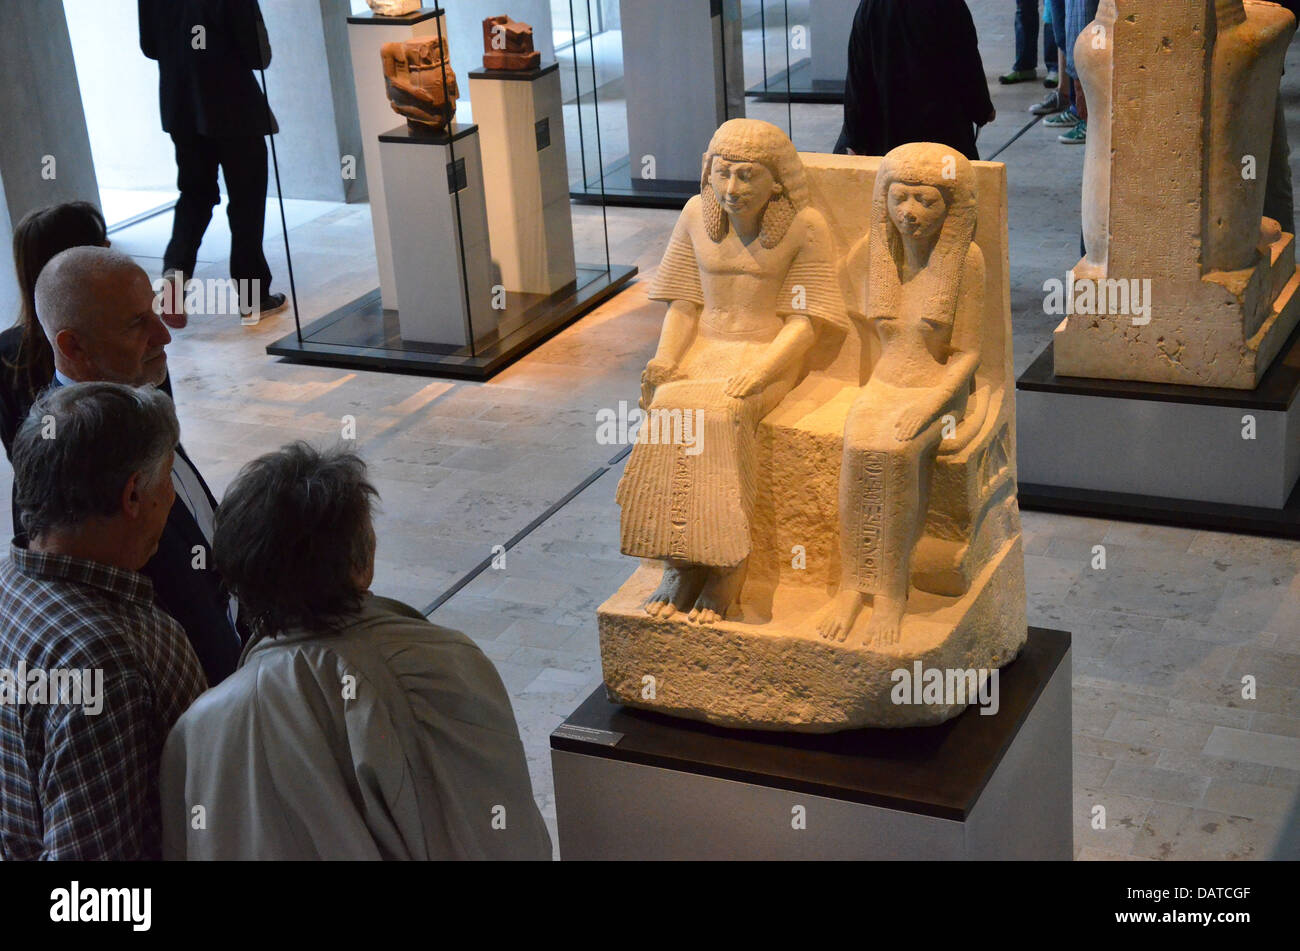 Staatliches Museum Ägyptischer Kunst State Museum of Egyptian Art in Munich the Bavarian State Collection for Ancient Egypt art Stock Photo